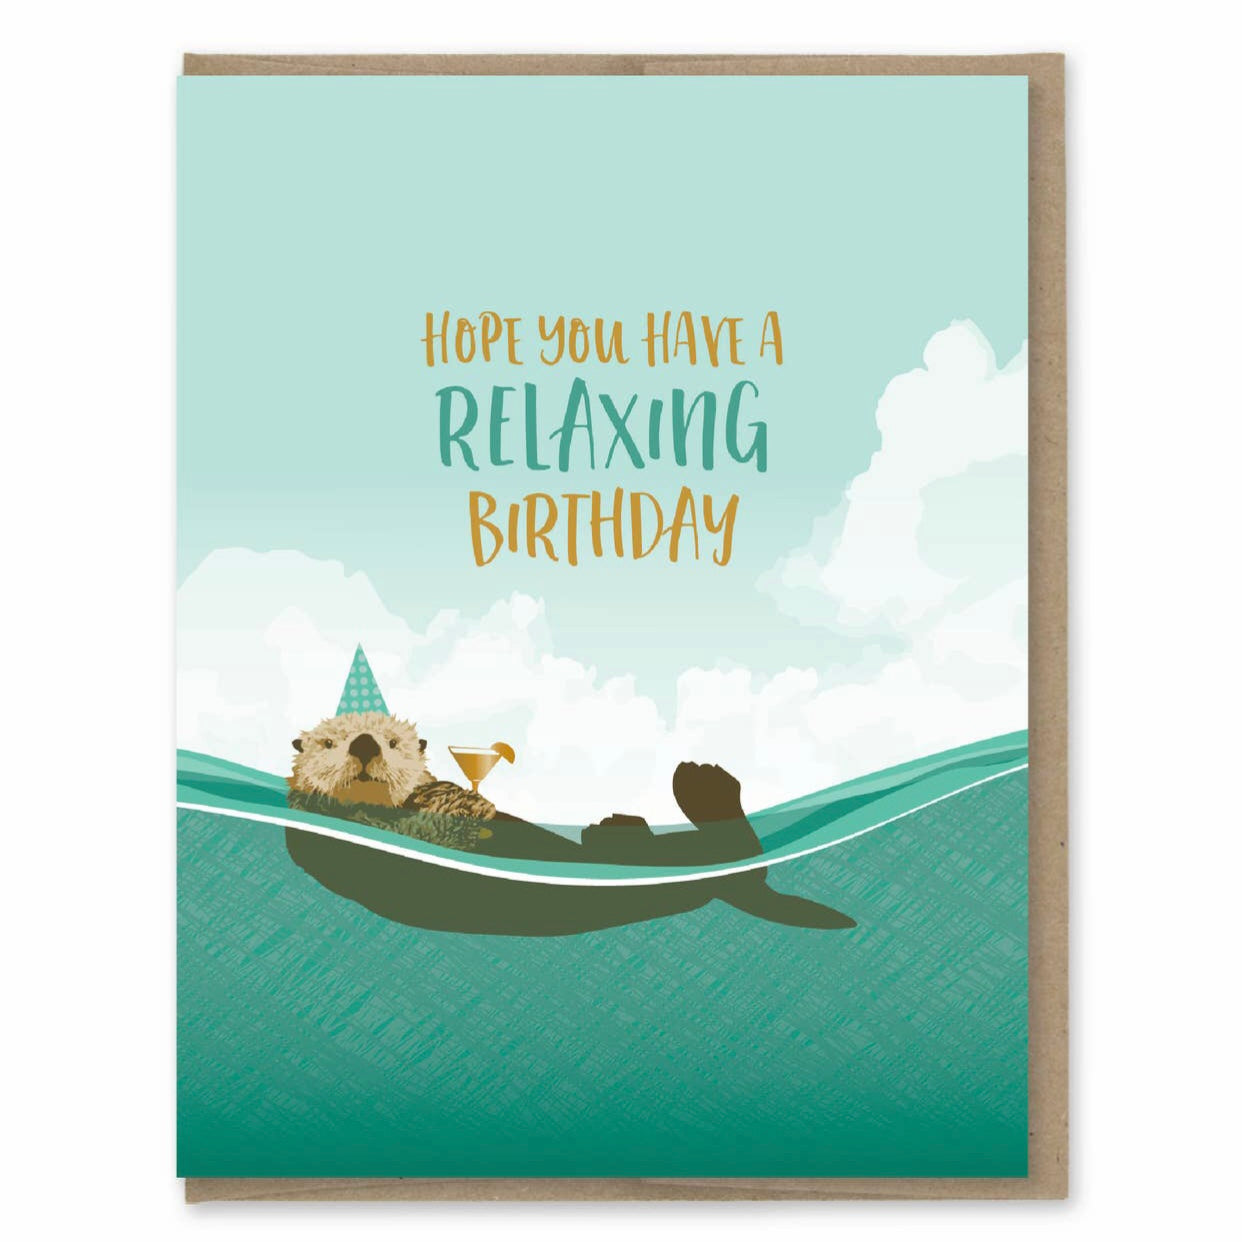 Hope you have a relaxing birthday greeting card